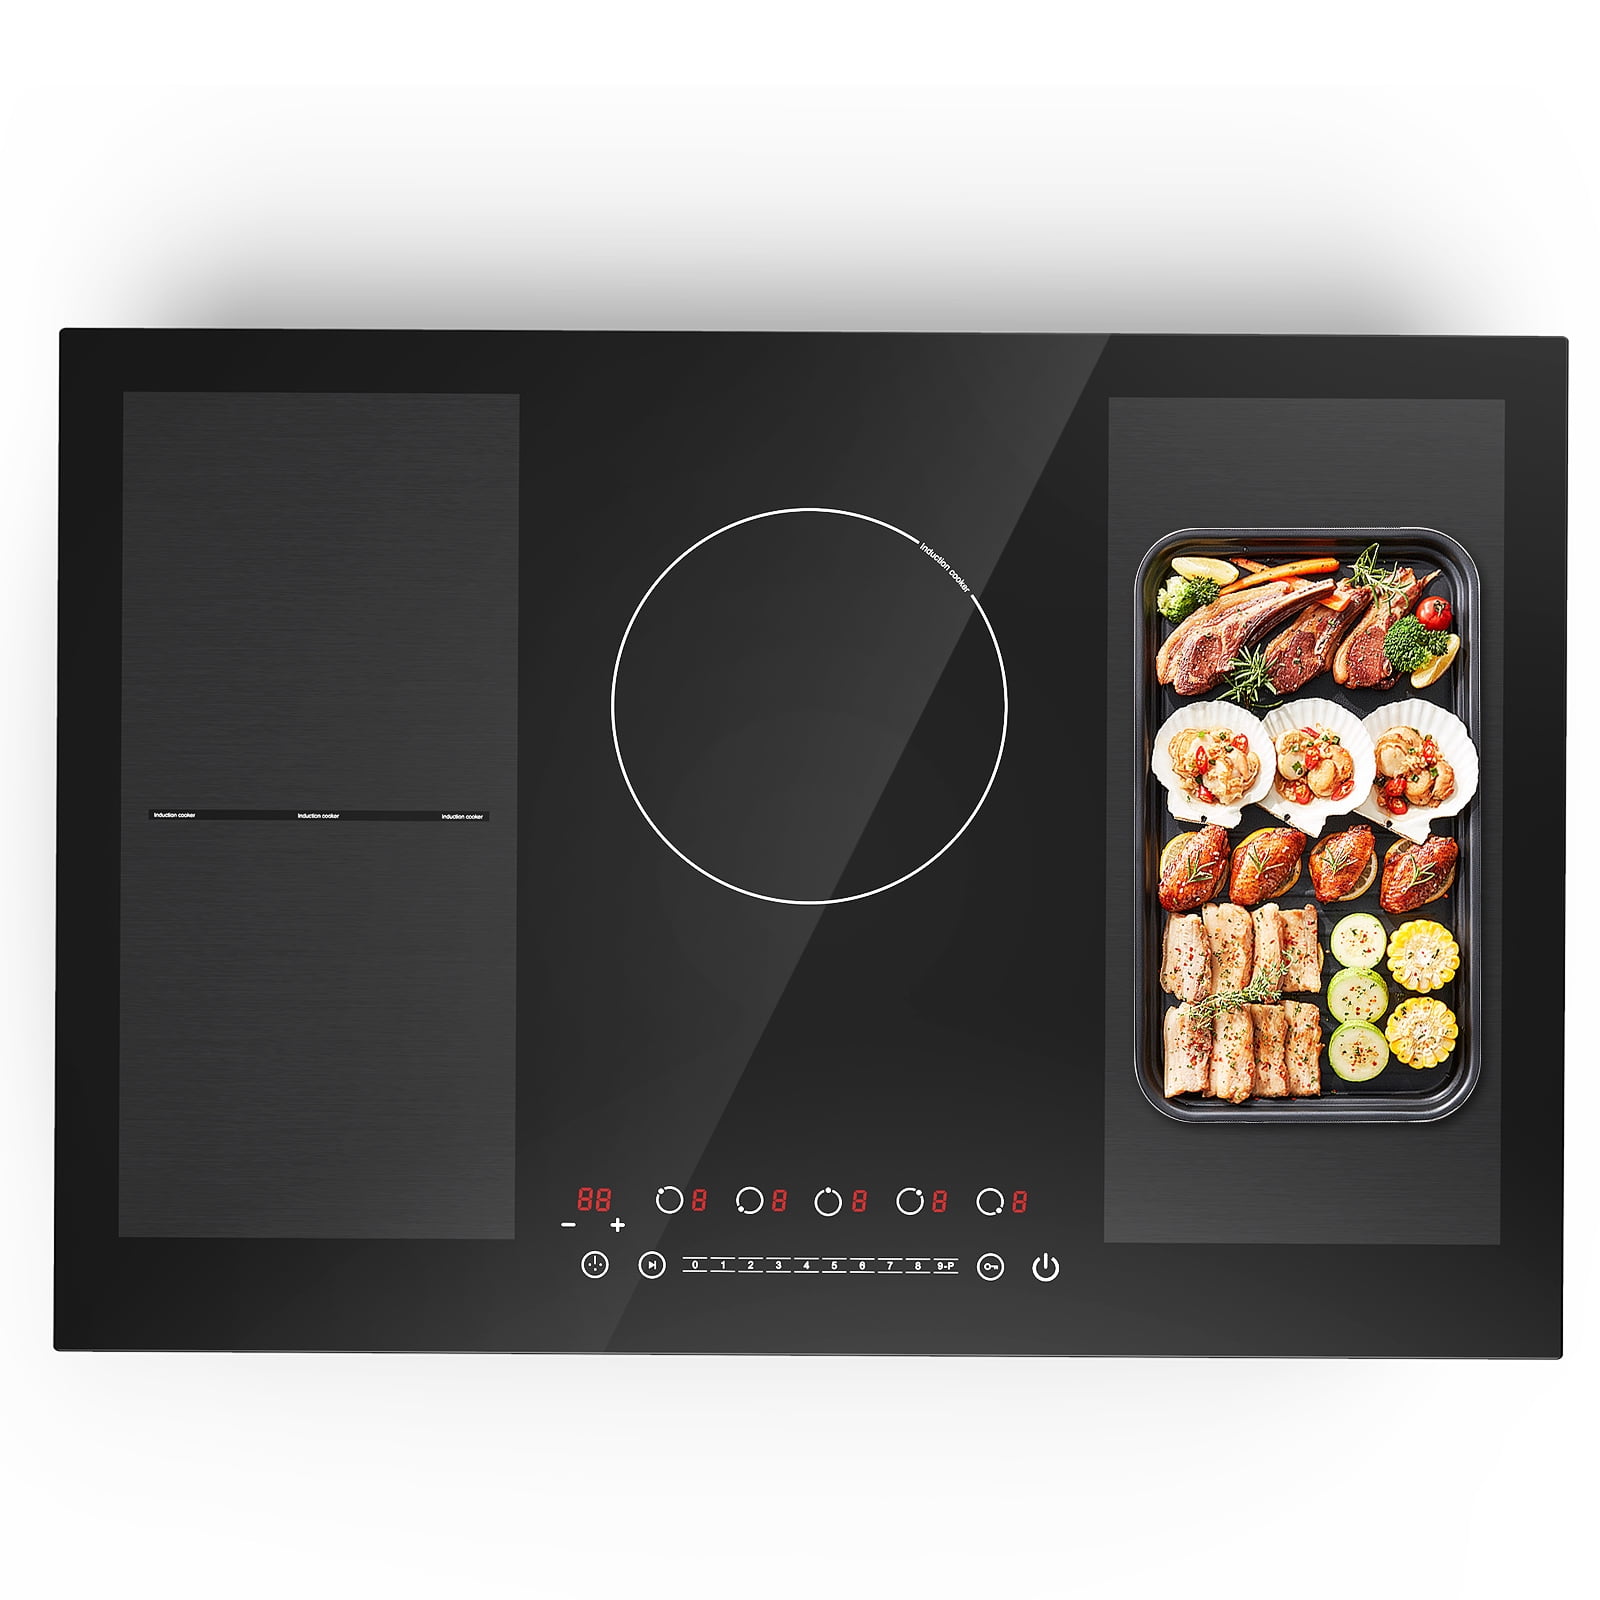 1pc Sk-5107 Plug-in 2000w Multi-functional Electric Cooker With Dual Burner  Design, High Power, Multiple Cooking Modes, Simple Operation, Energy  Saving, Suitable For All Types Of Pots And Pans, Stainless Steel Body, Even